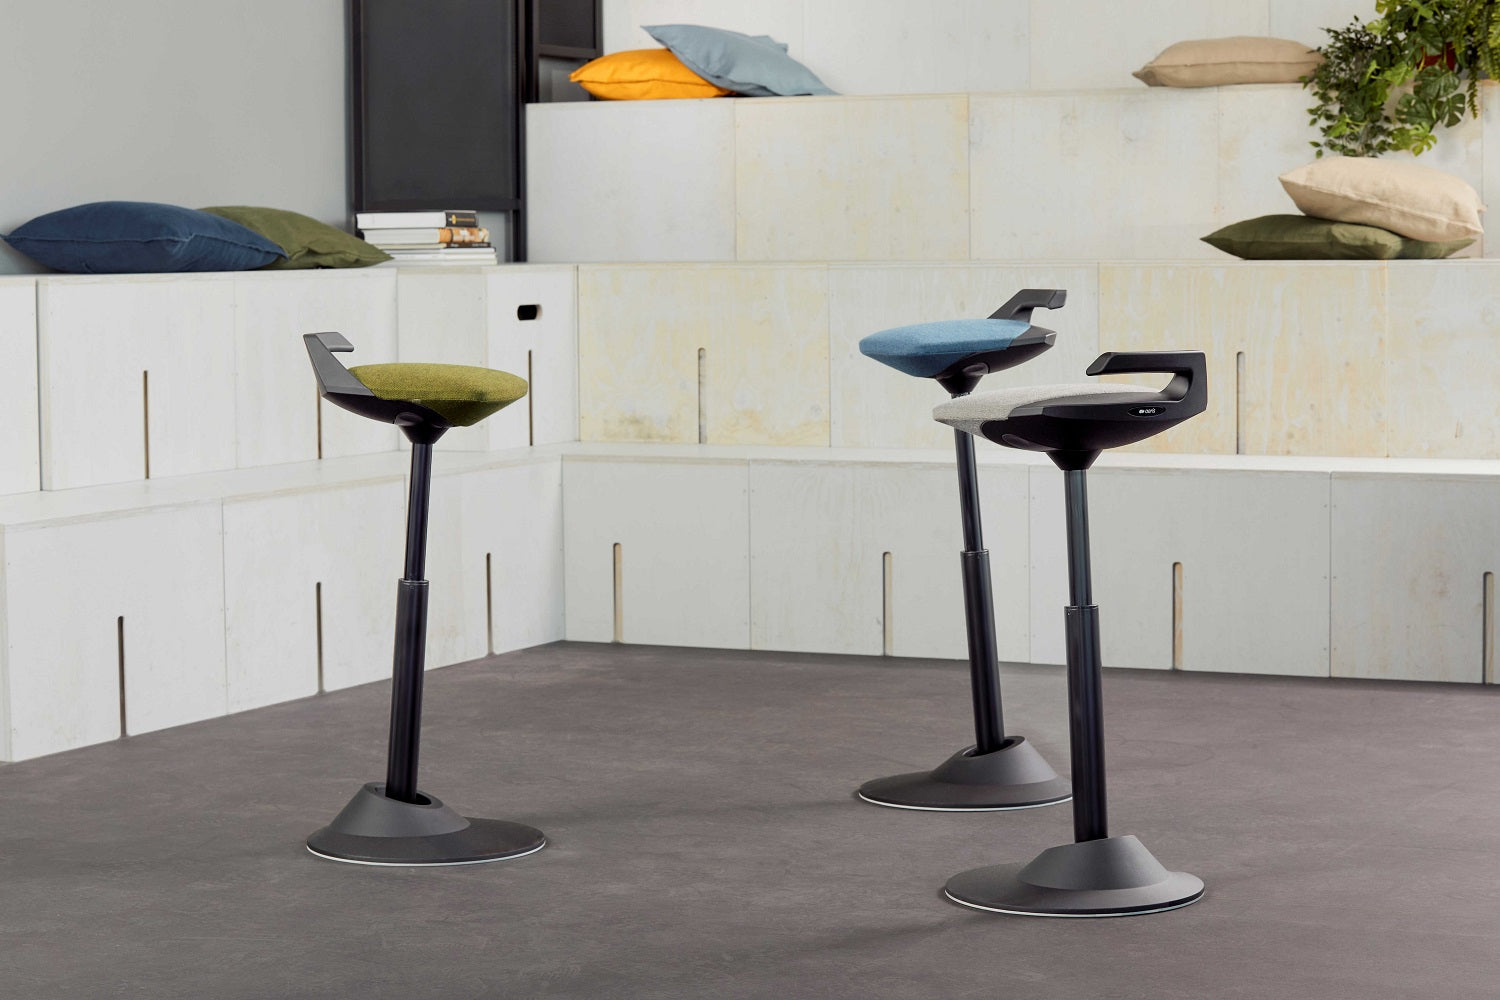 The Aeris Muvman standing chair combines moving sitting and standing.